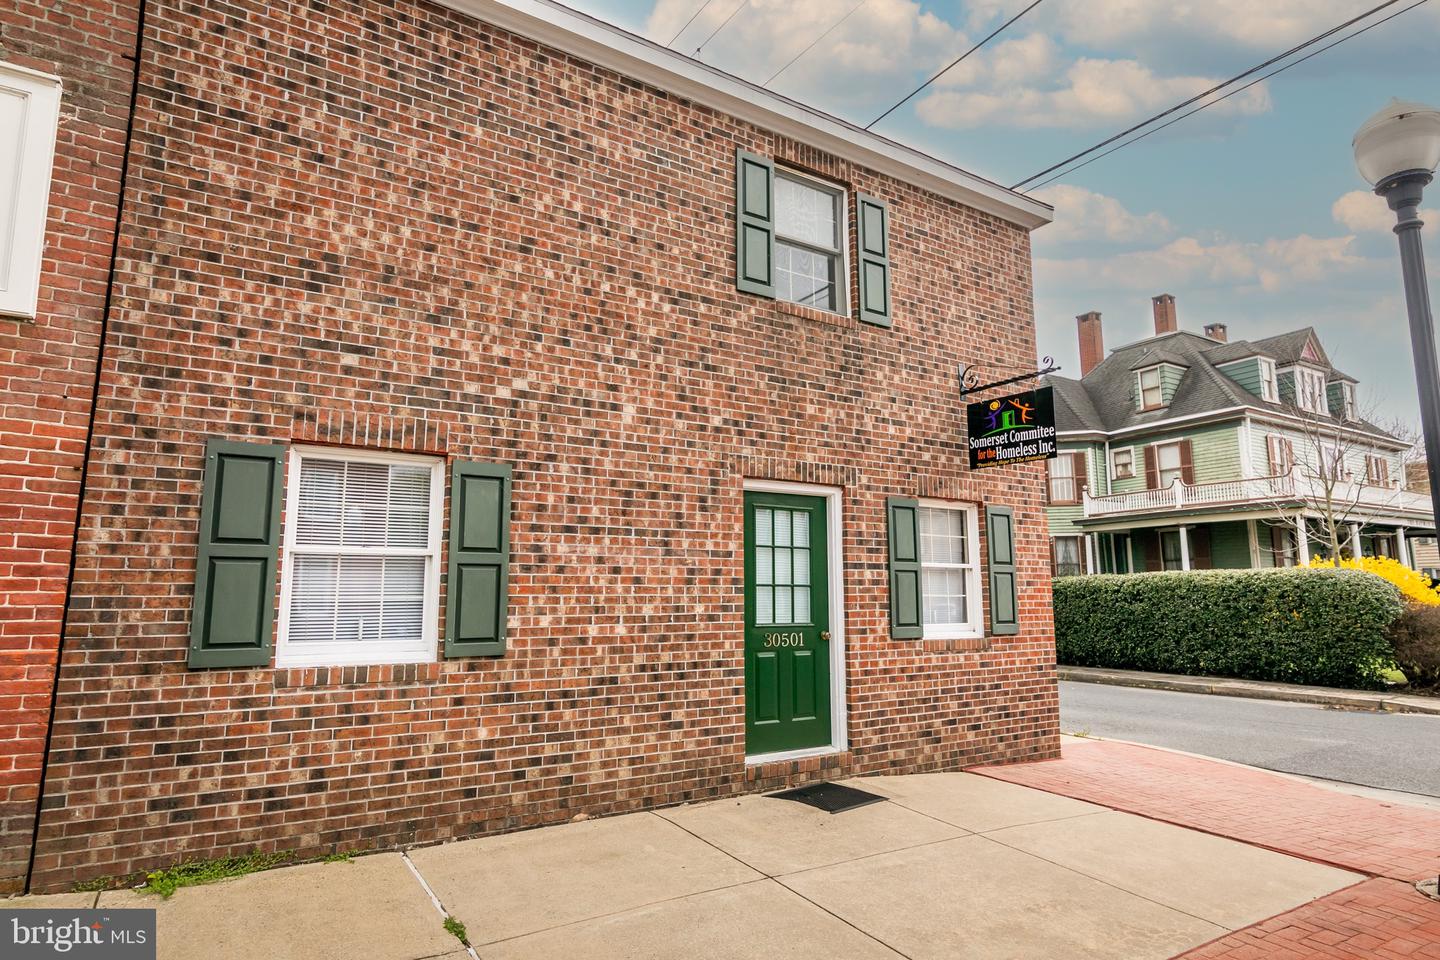 MDSO2004408-802947409774-2024-03-28-12-58-39 30501 Prince William St | Princess Anne, MD Real Estate For Sale | MLS# Mdso2004408  - Ocean Atlantic